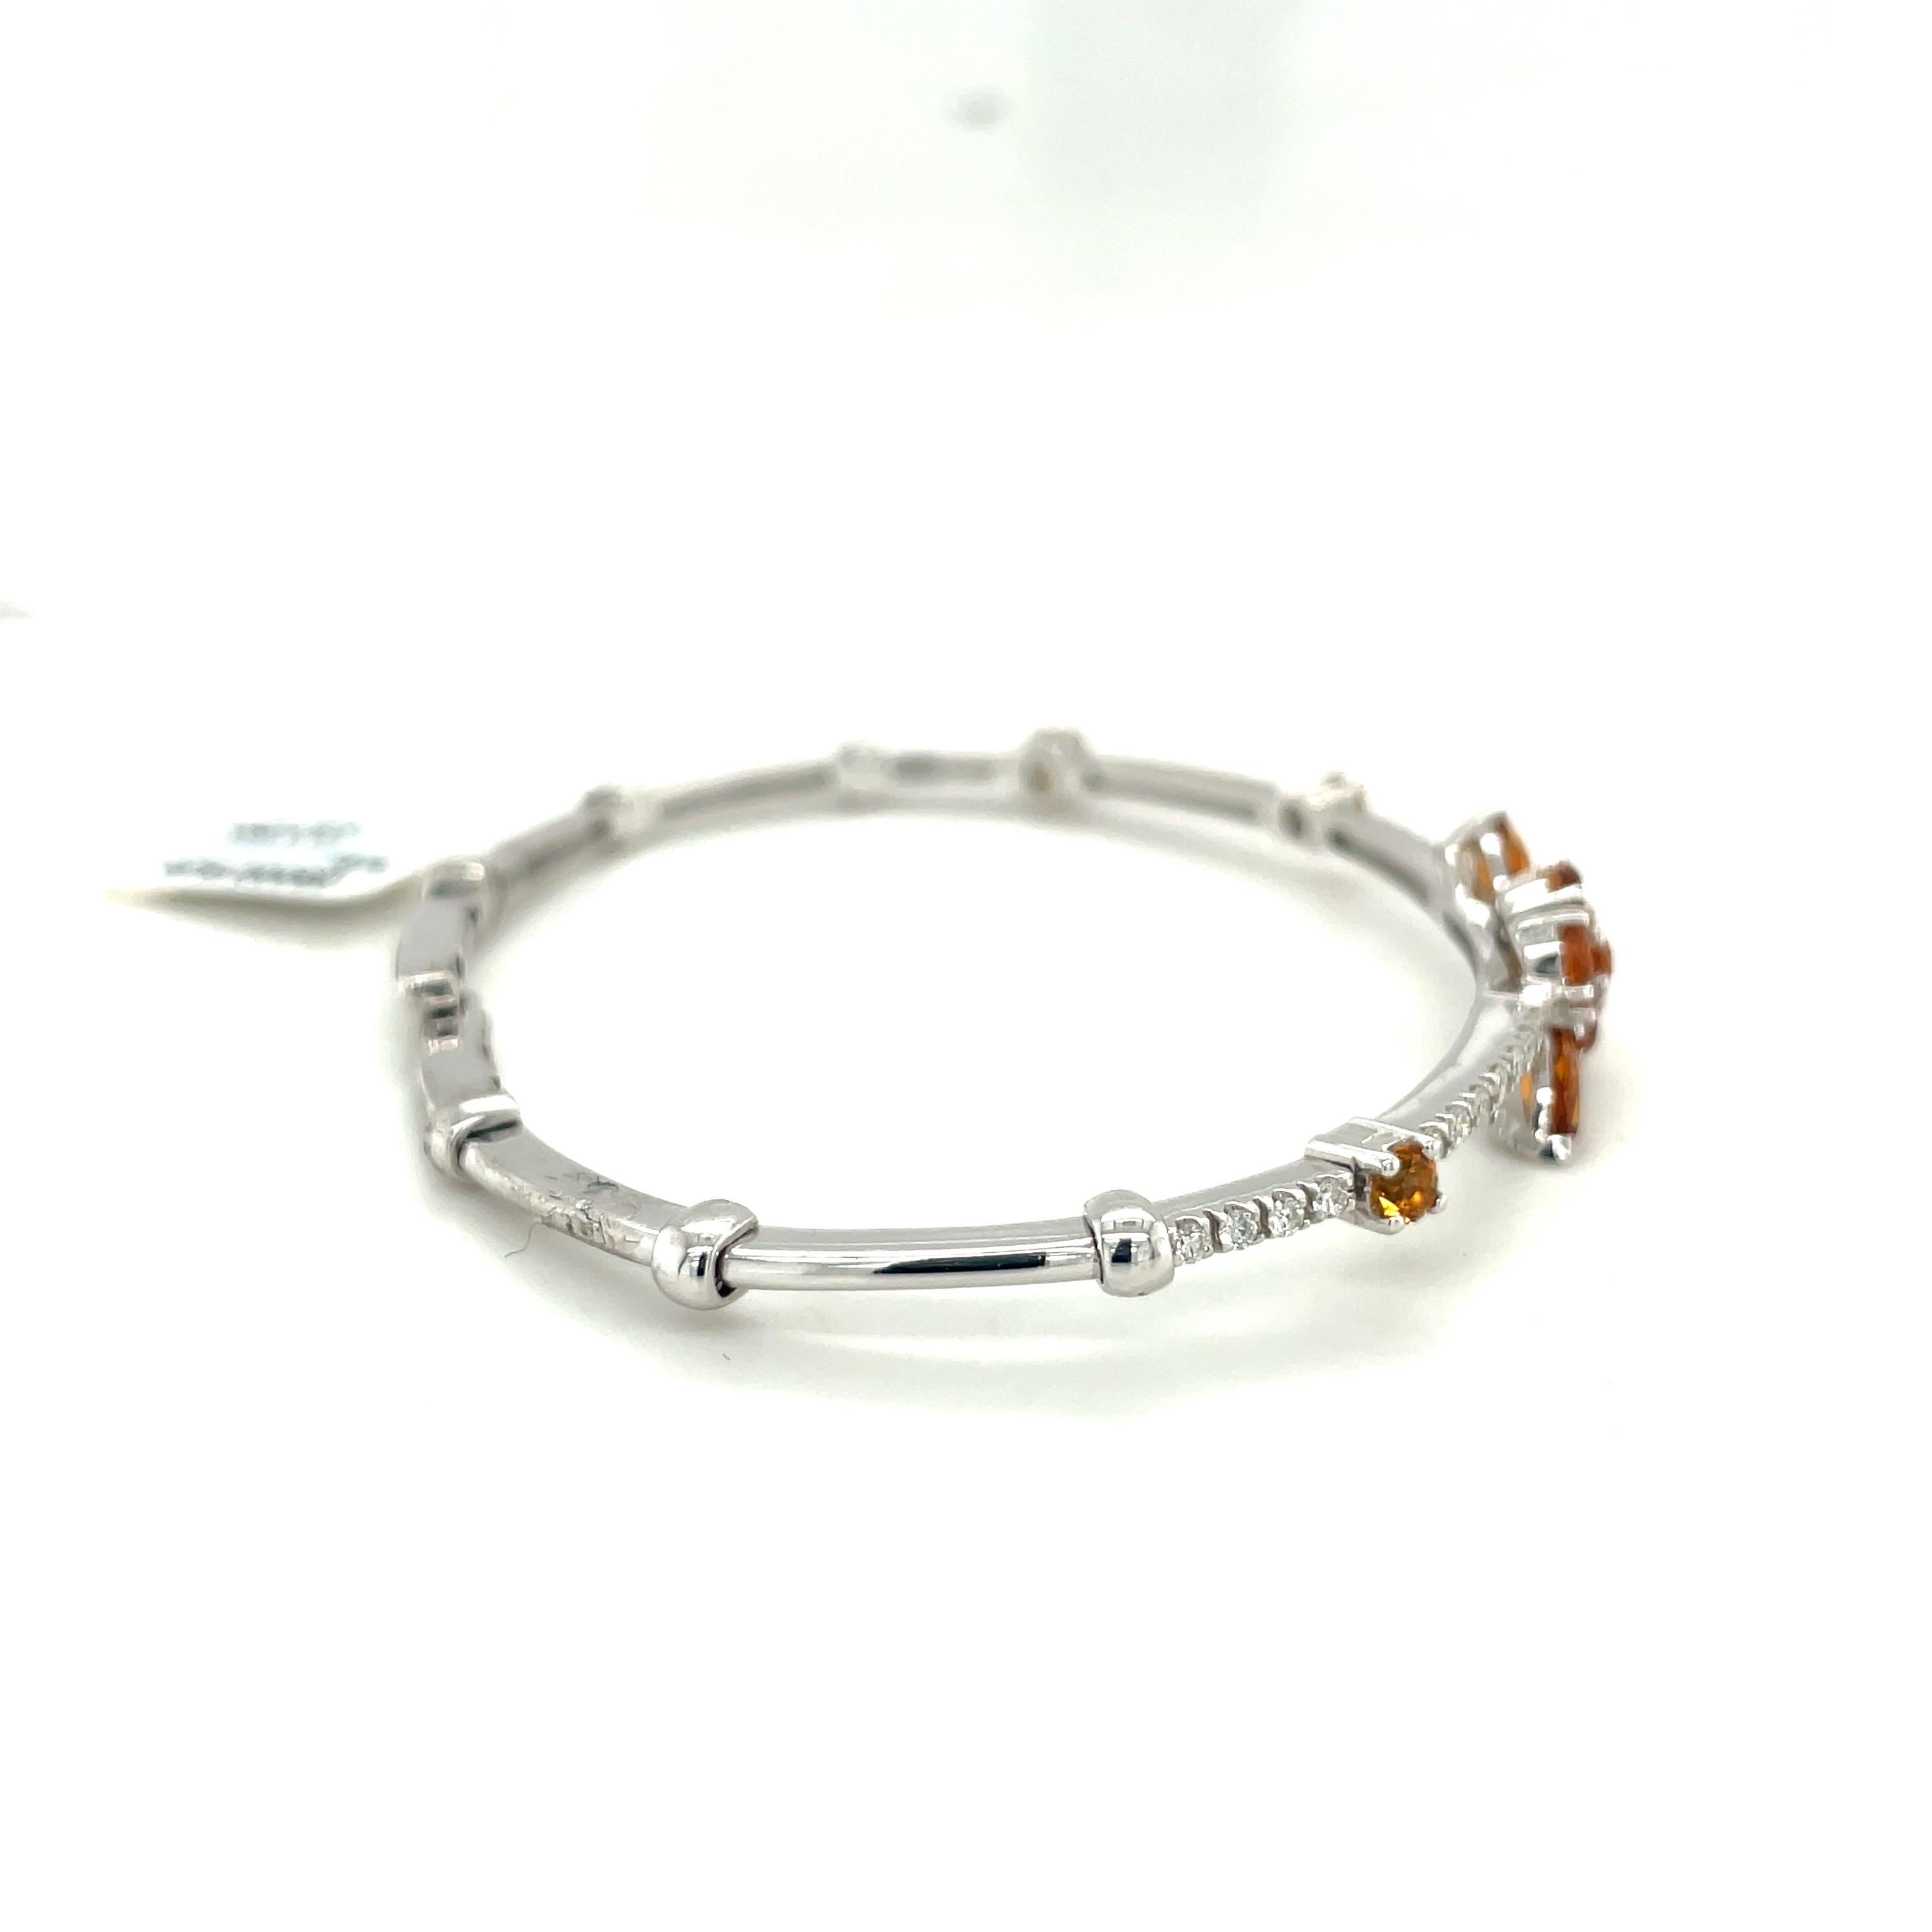 This beautiful flexible open back 18kt white gold bangle features 4 marquis cut citrines, totaling 0.30 cts, accented with 0.26 cts of white diamonds. The flexibility of the bangles makes these suitable for a wide range of wrist sizes and the slight